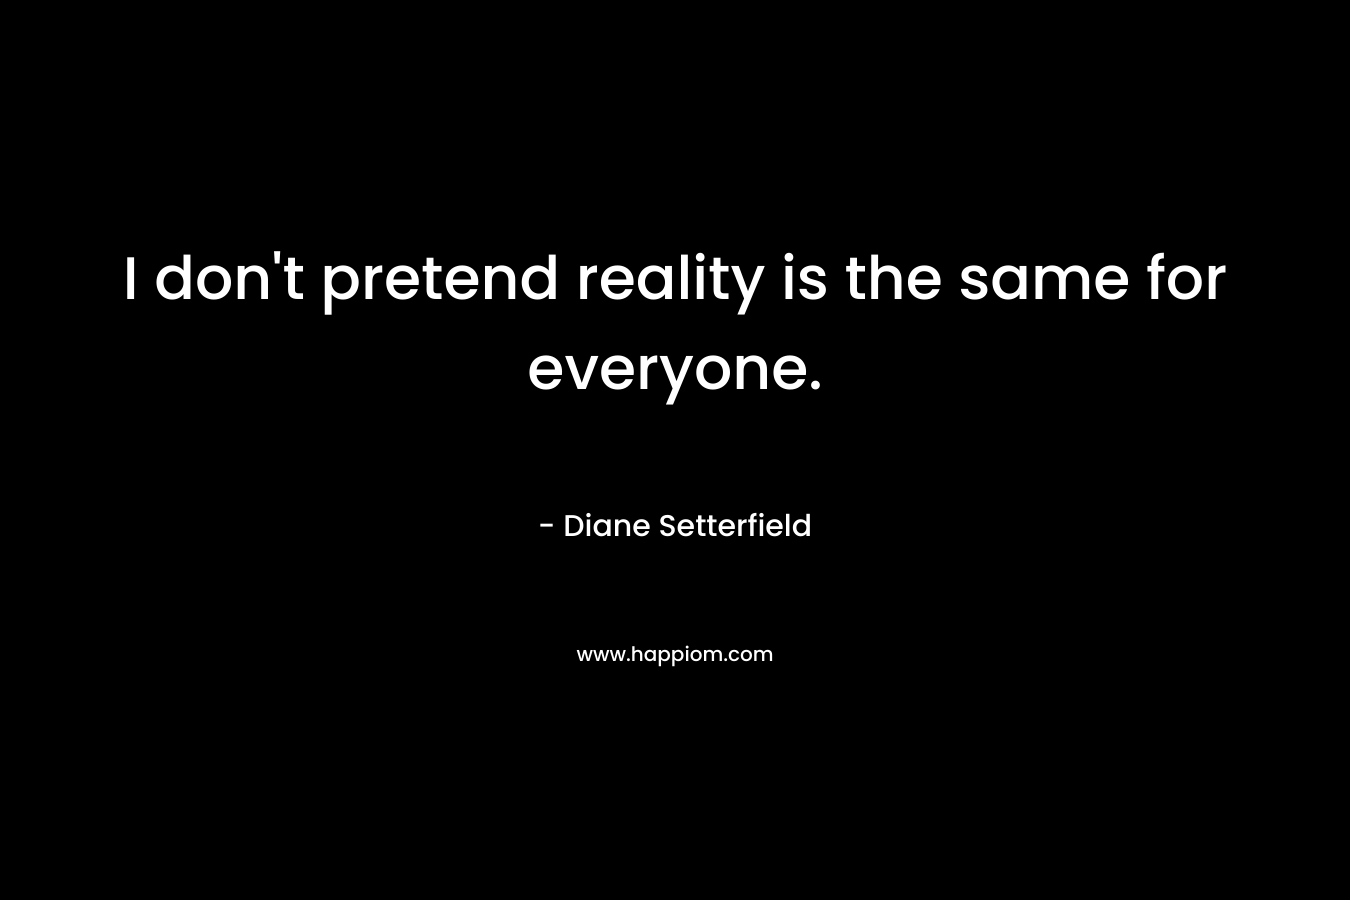 I don't pretend reality is the same for everyone.